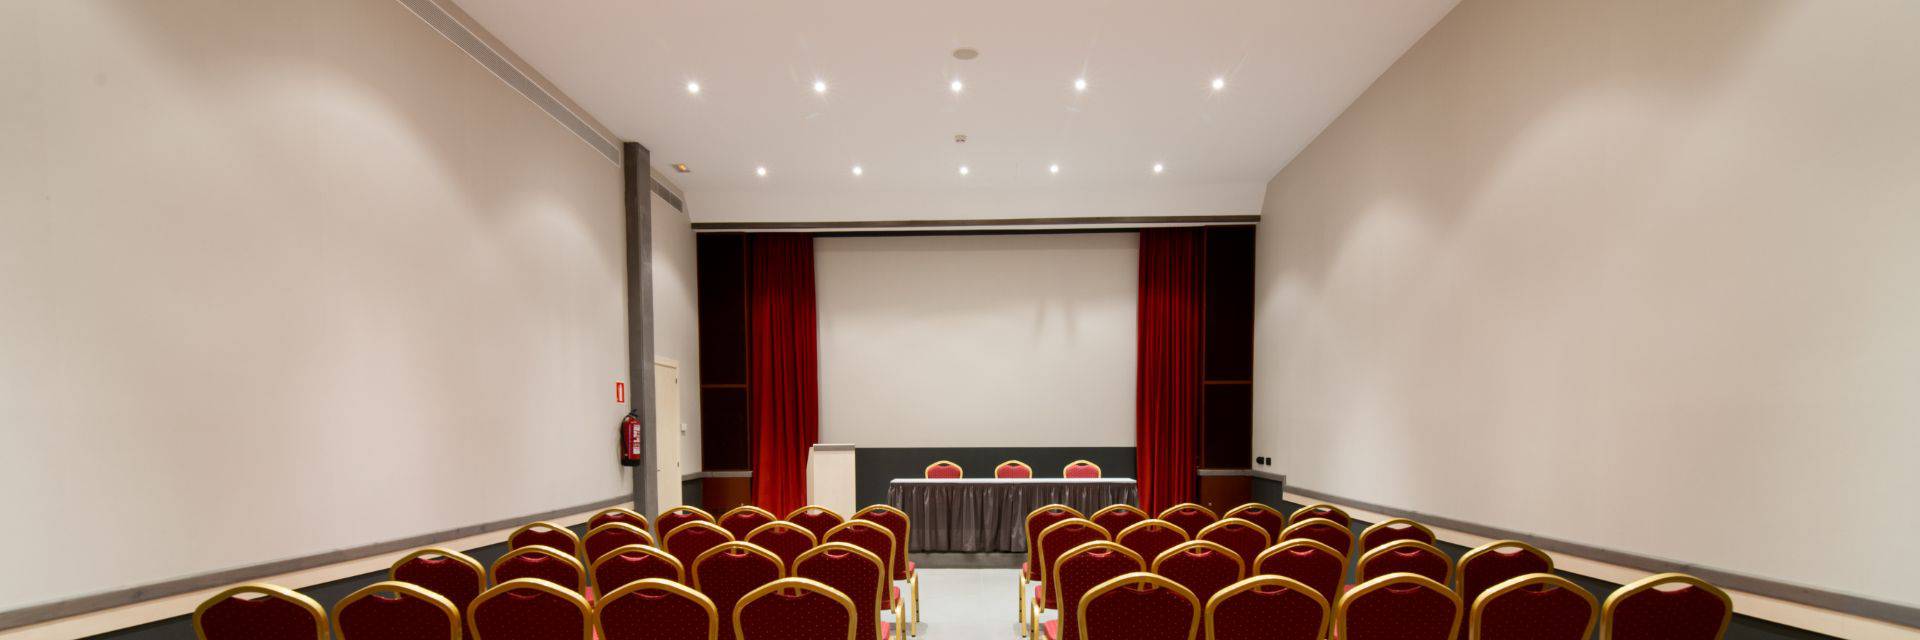 Event rooms Sunotel Club Central  Barcelona